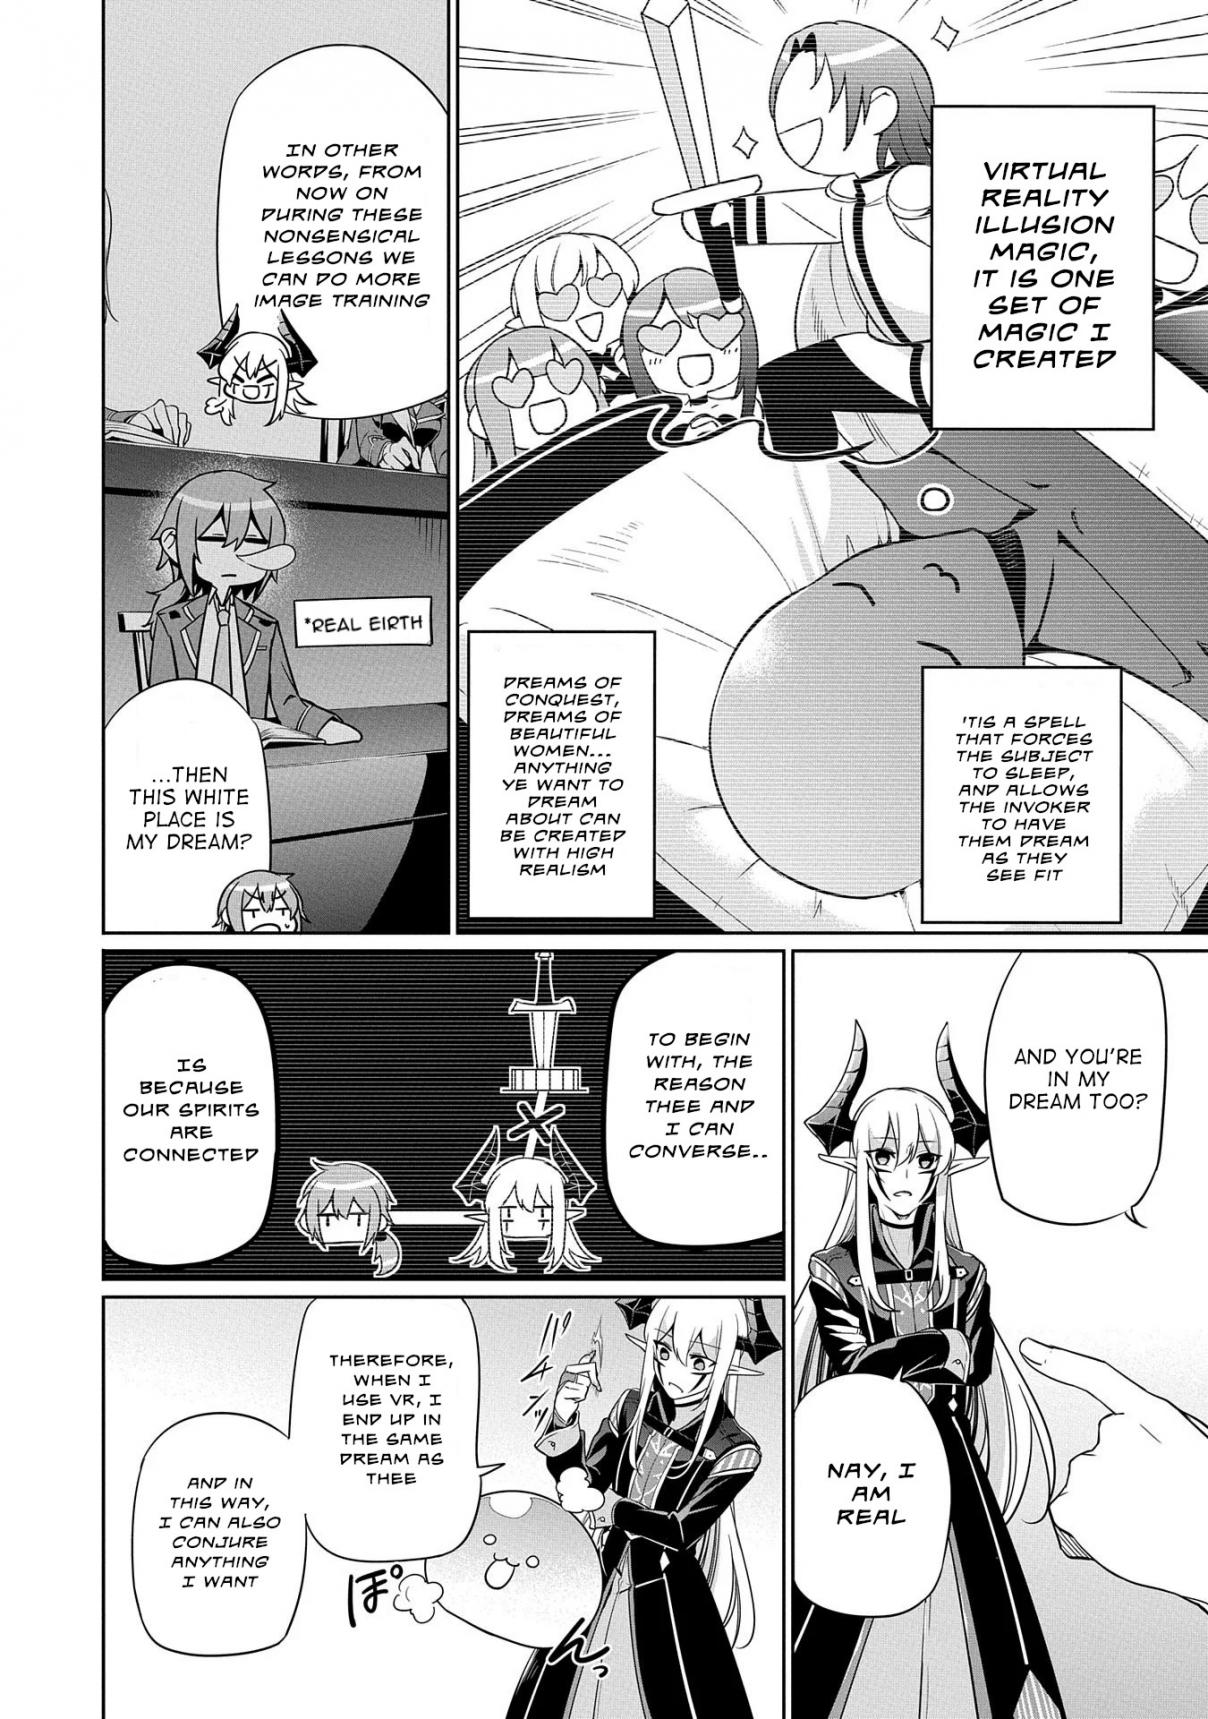 A Breakthrough Brought by Forbidden Master and Disciple Vol. 2 Ch. 6